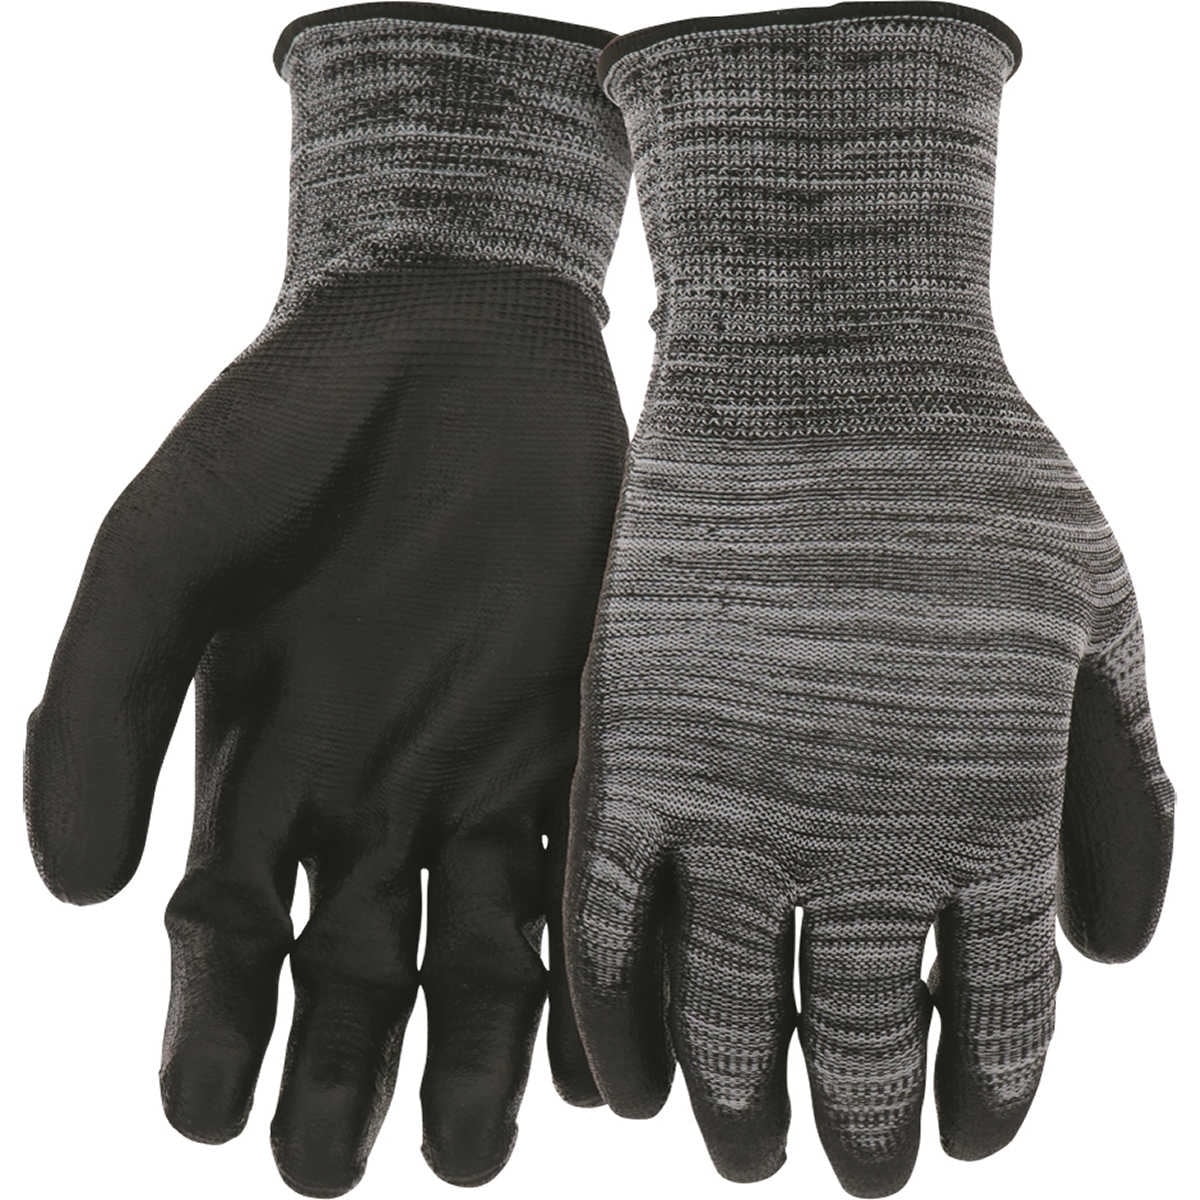 Boss Men's Antimicrobial Work Gloves with COOLMAX, Gray/Black, XL